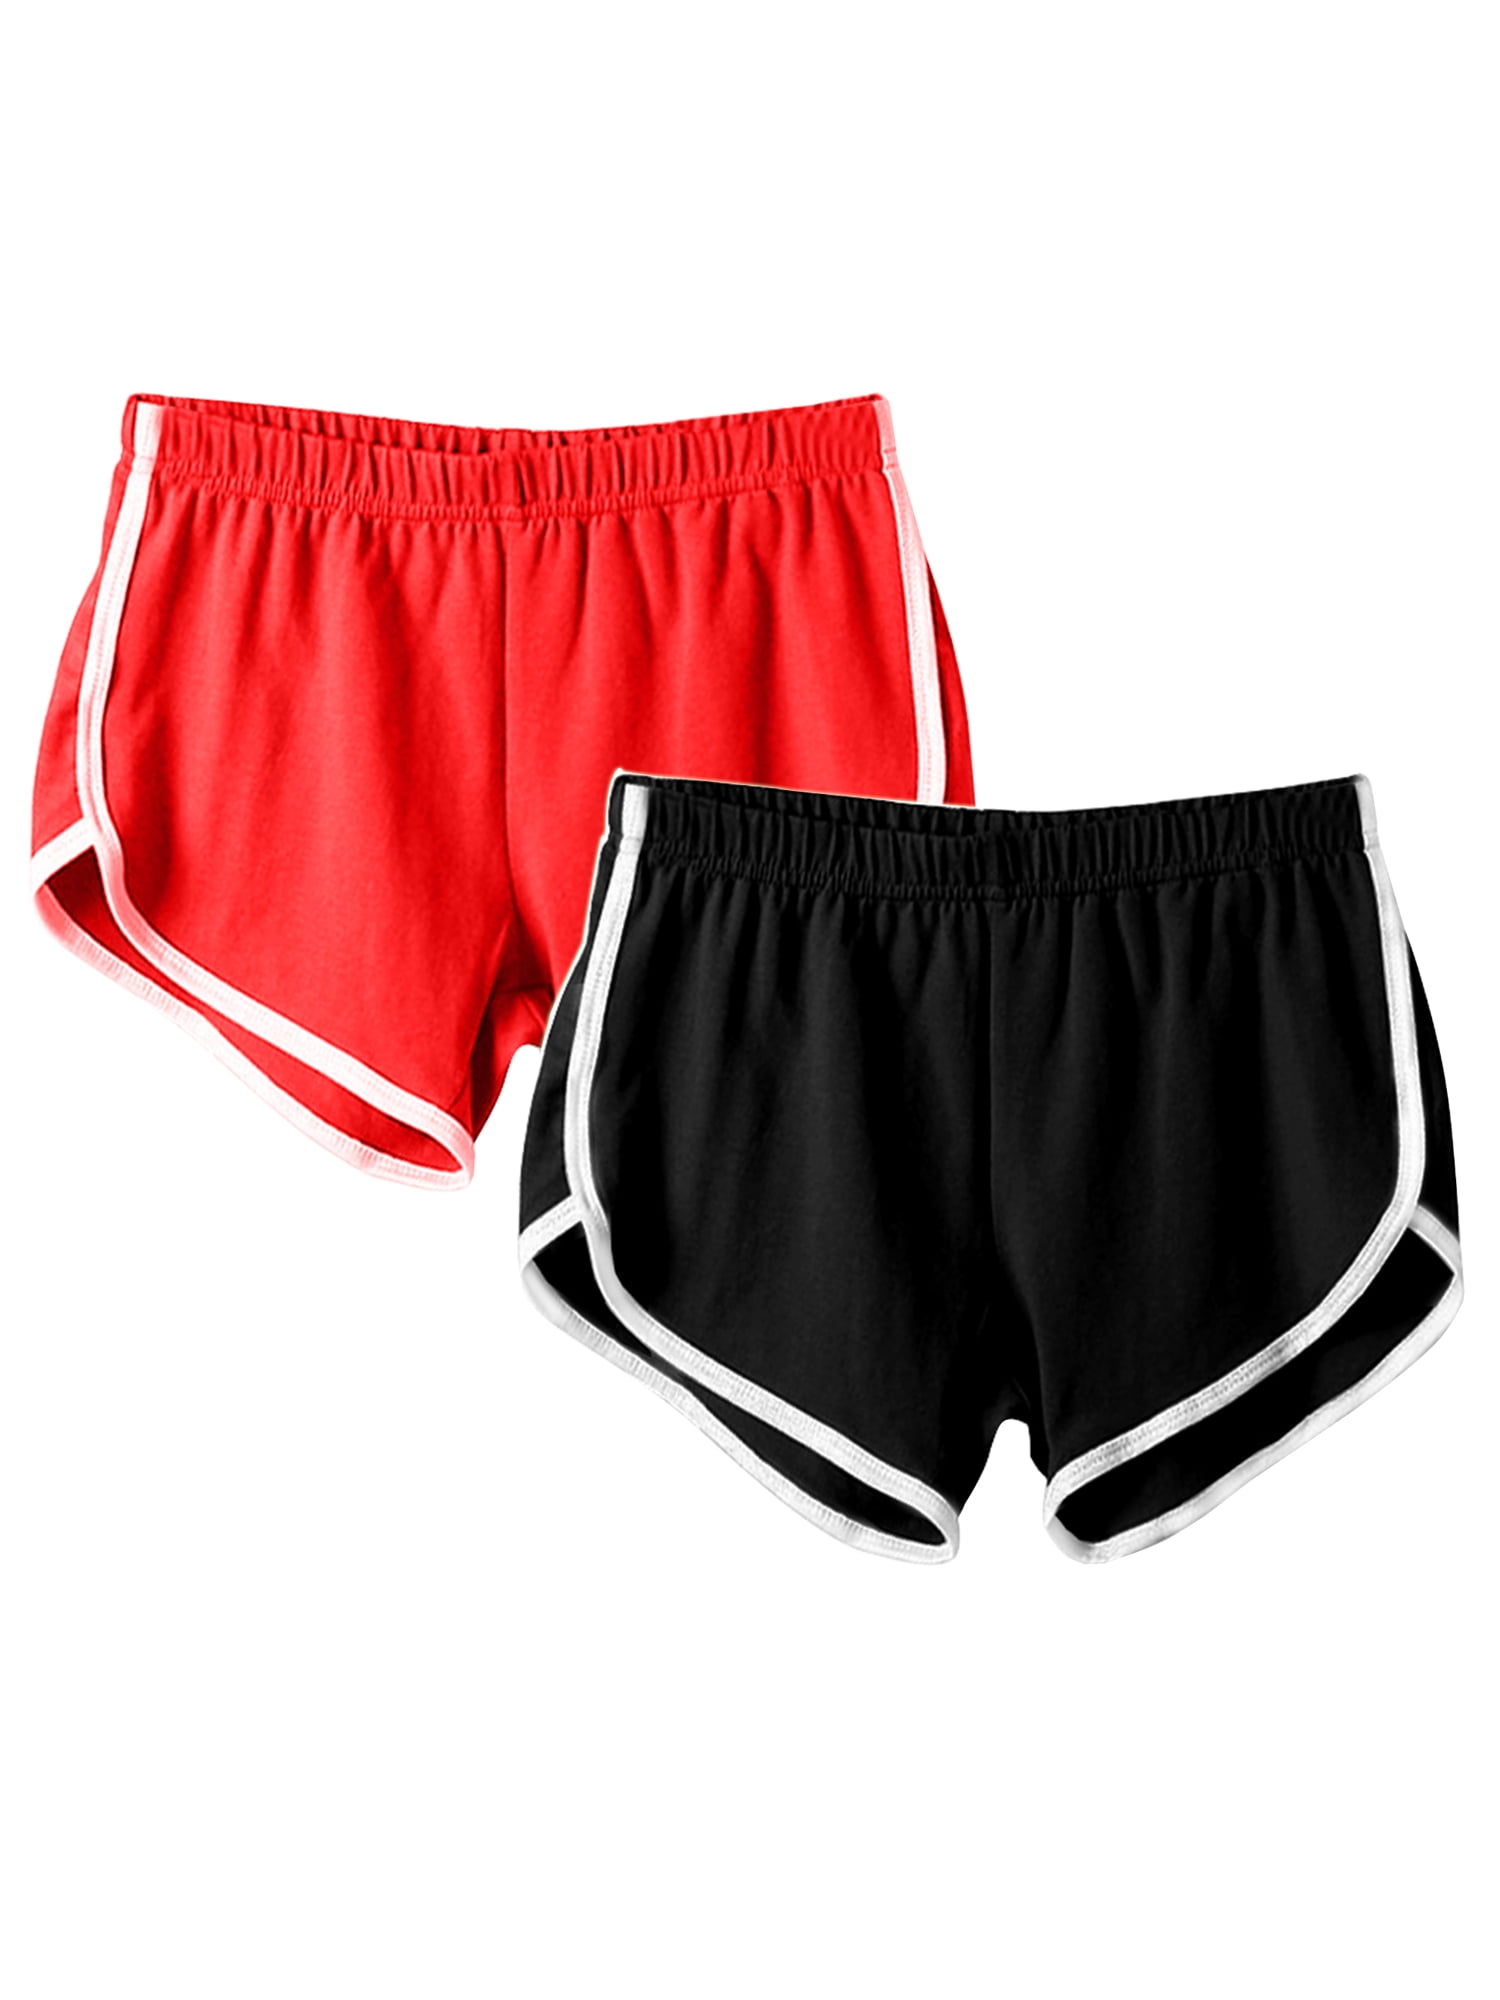 Women's New Double Side Stripe ladies Cotton Active Gym Cycling Shorts Hot Pants 